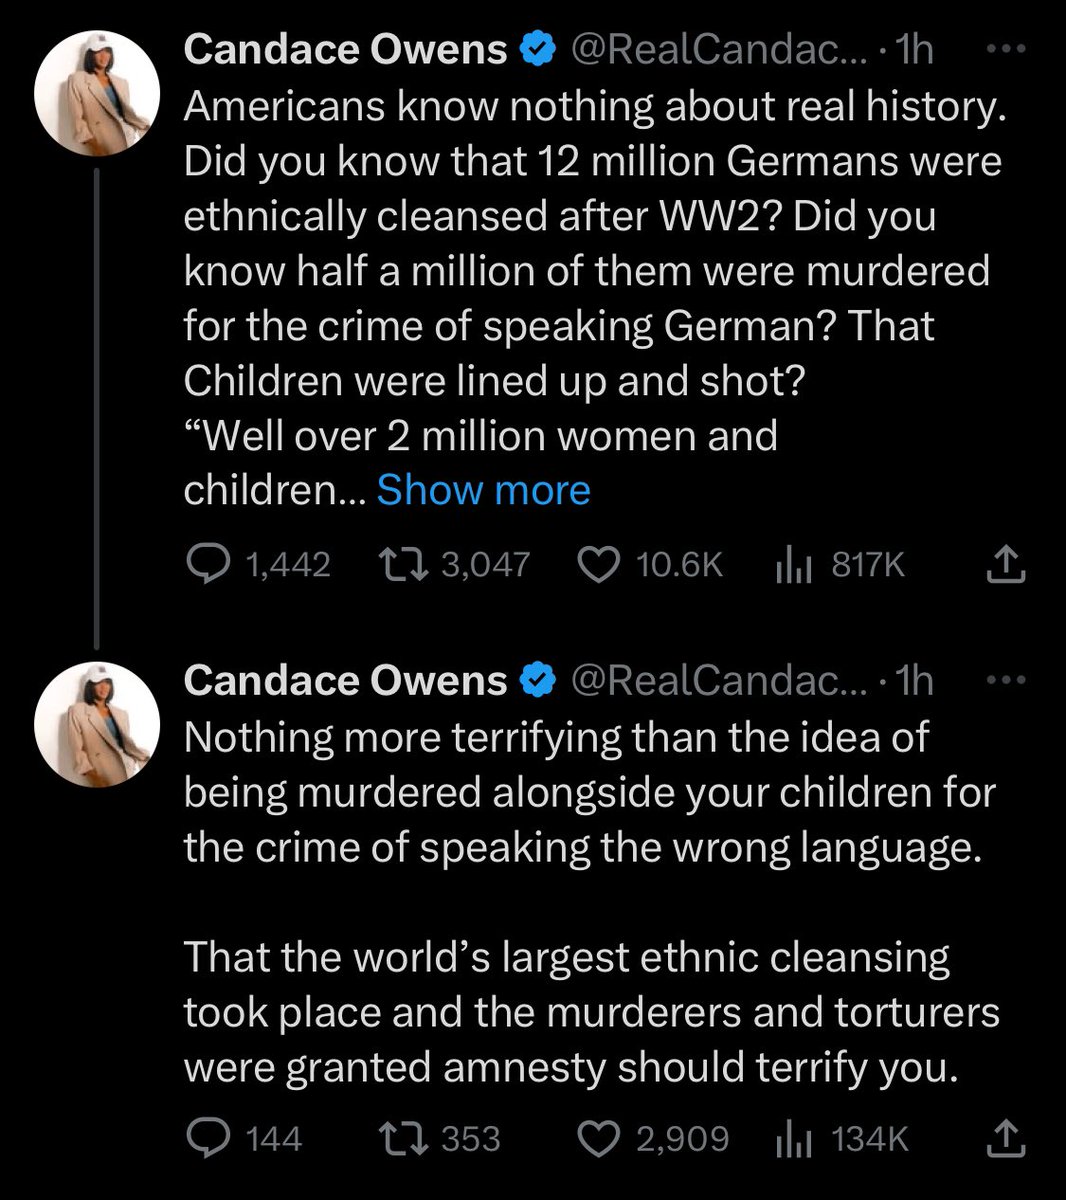 This is making my head split in pain.

Are we supposed to believe that she is so ignorant of history, uninformed & frankly low-IQ enough to believe that reprisals against Germans right after WW2 was only because “they spoke German?”

Stop playing coy & go full groyper already.